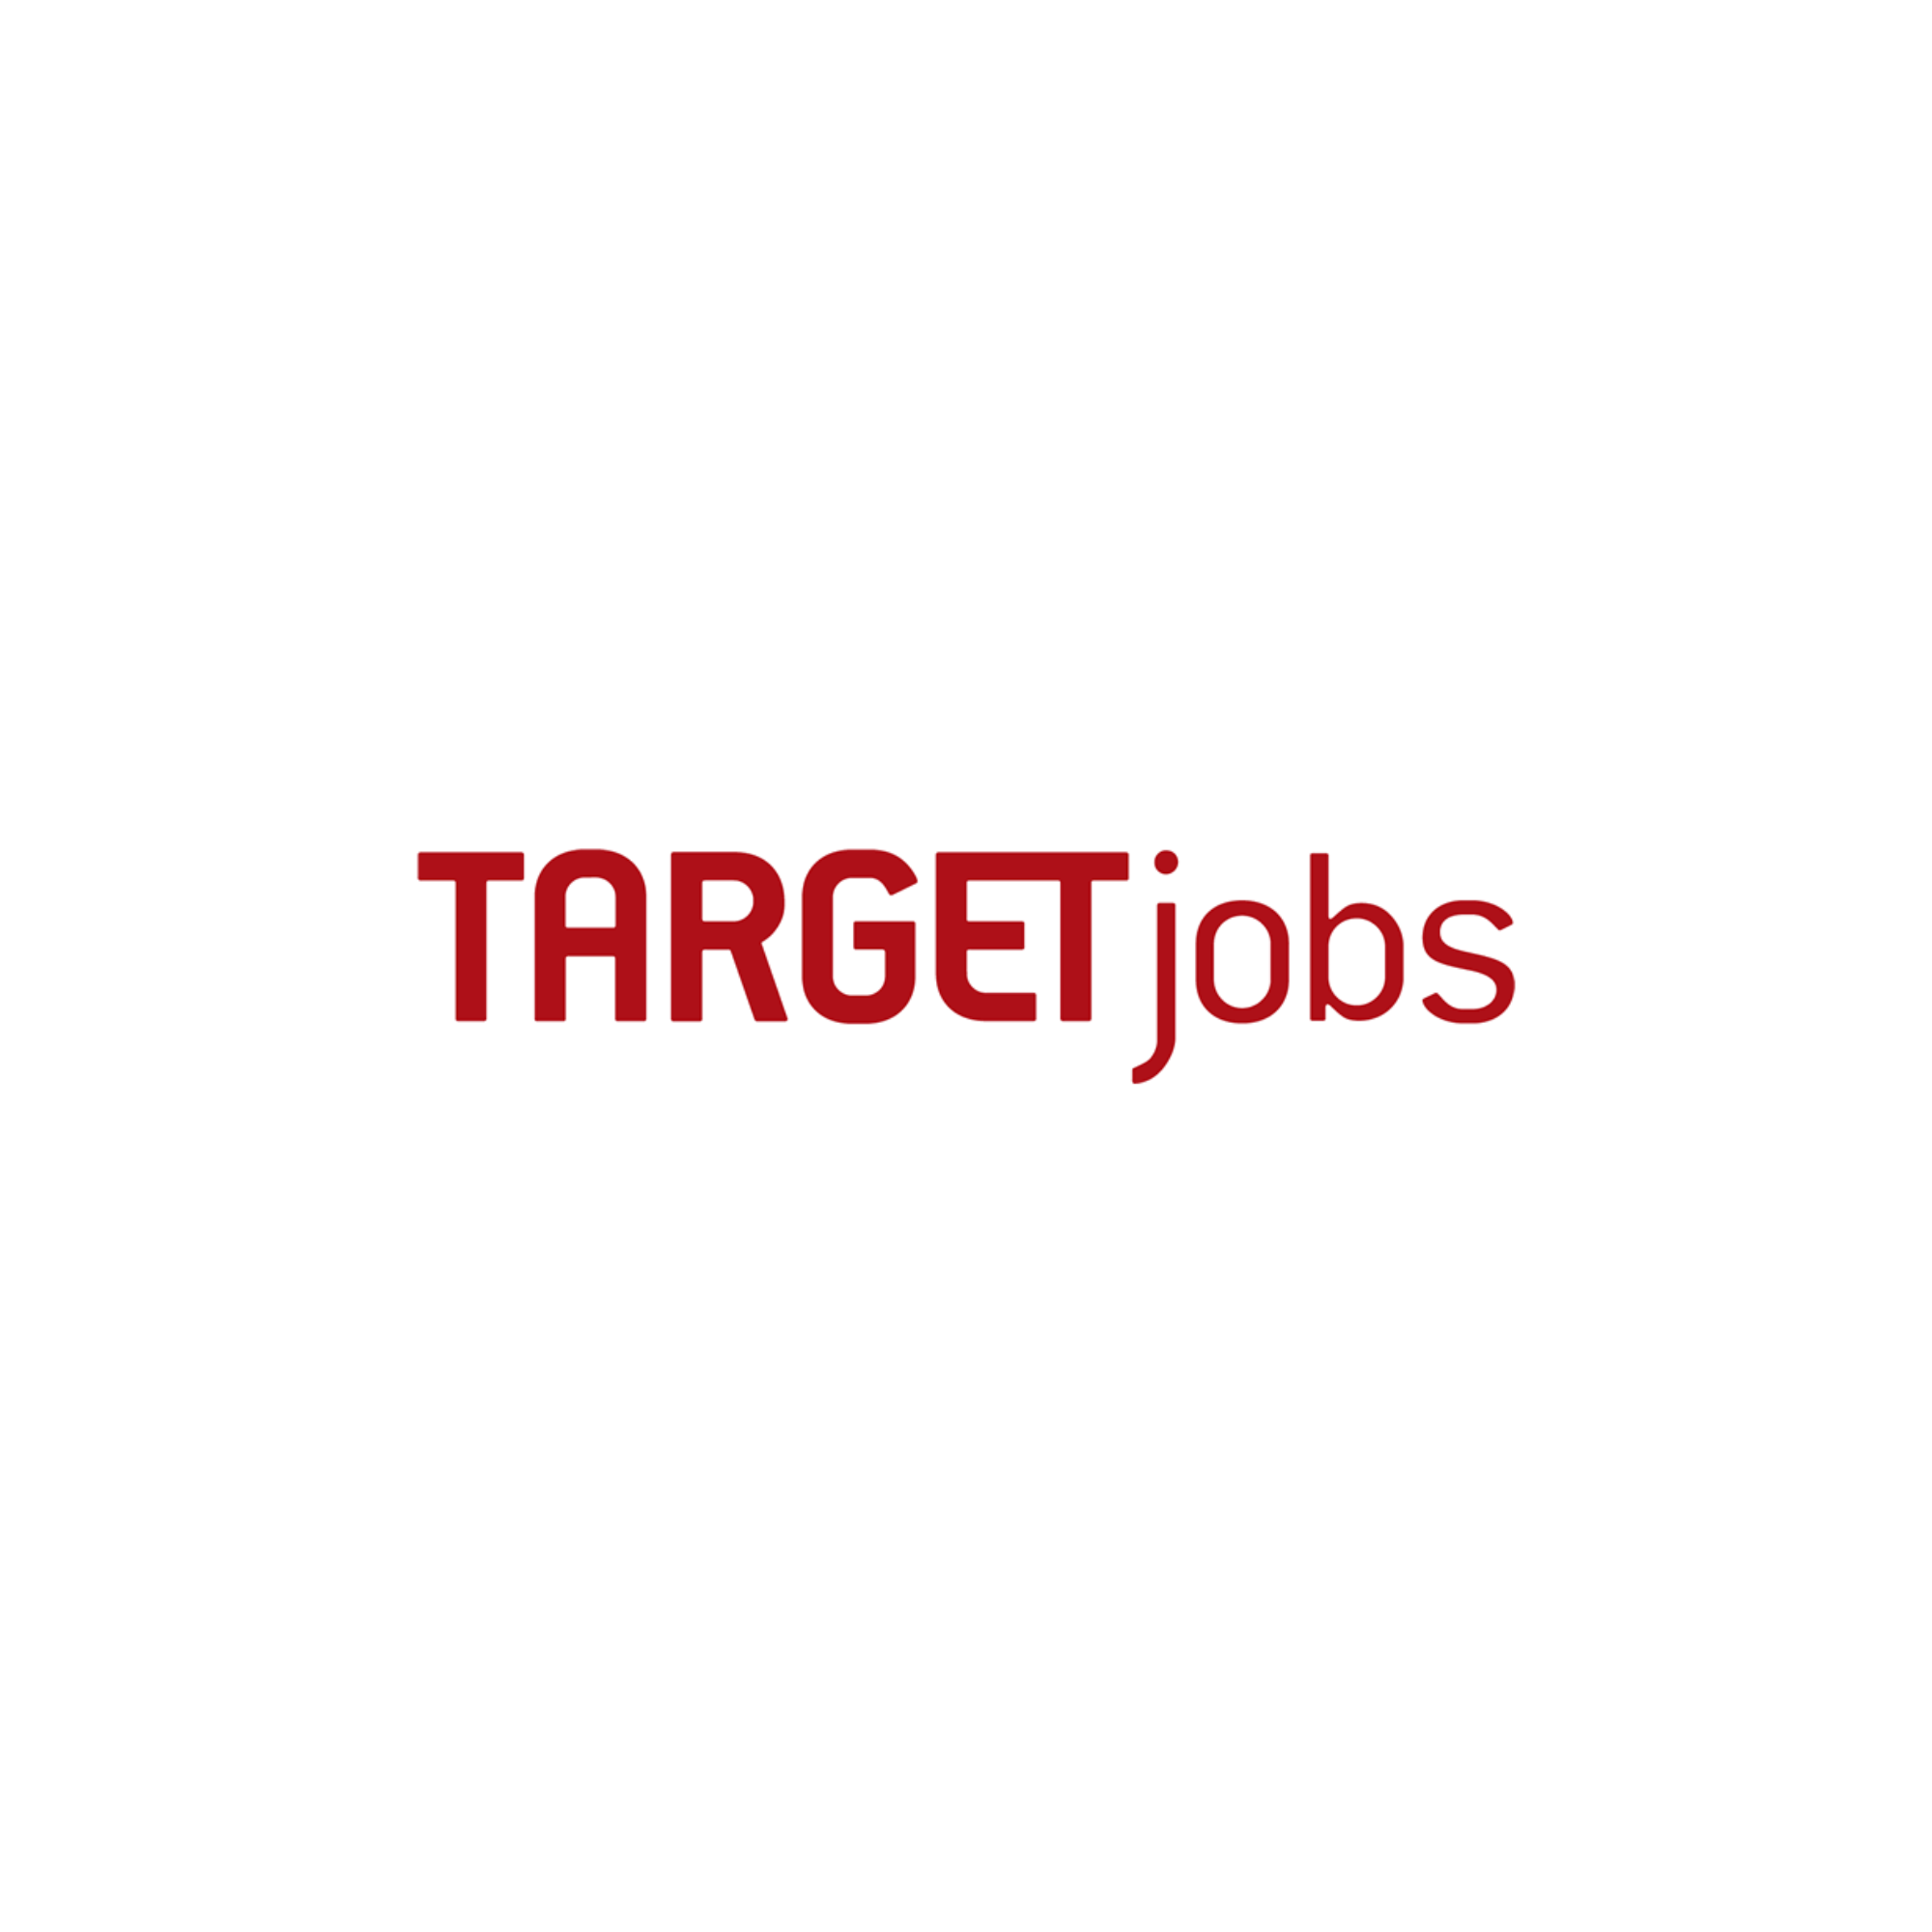 picture of the text 'target jobs'